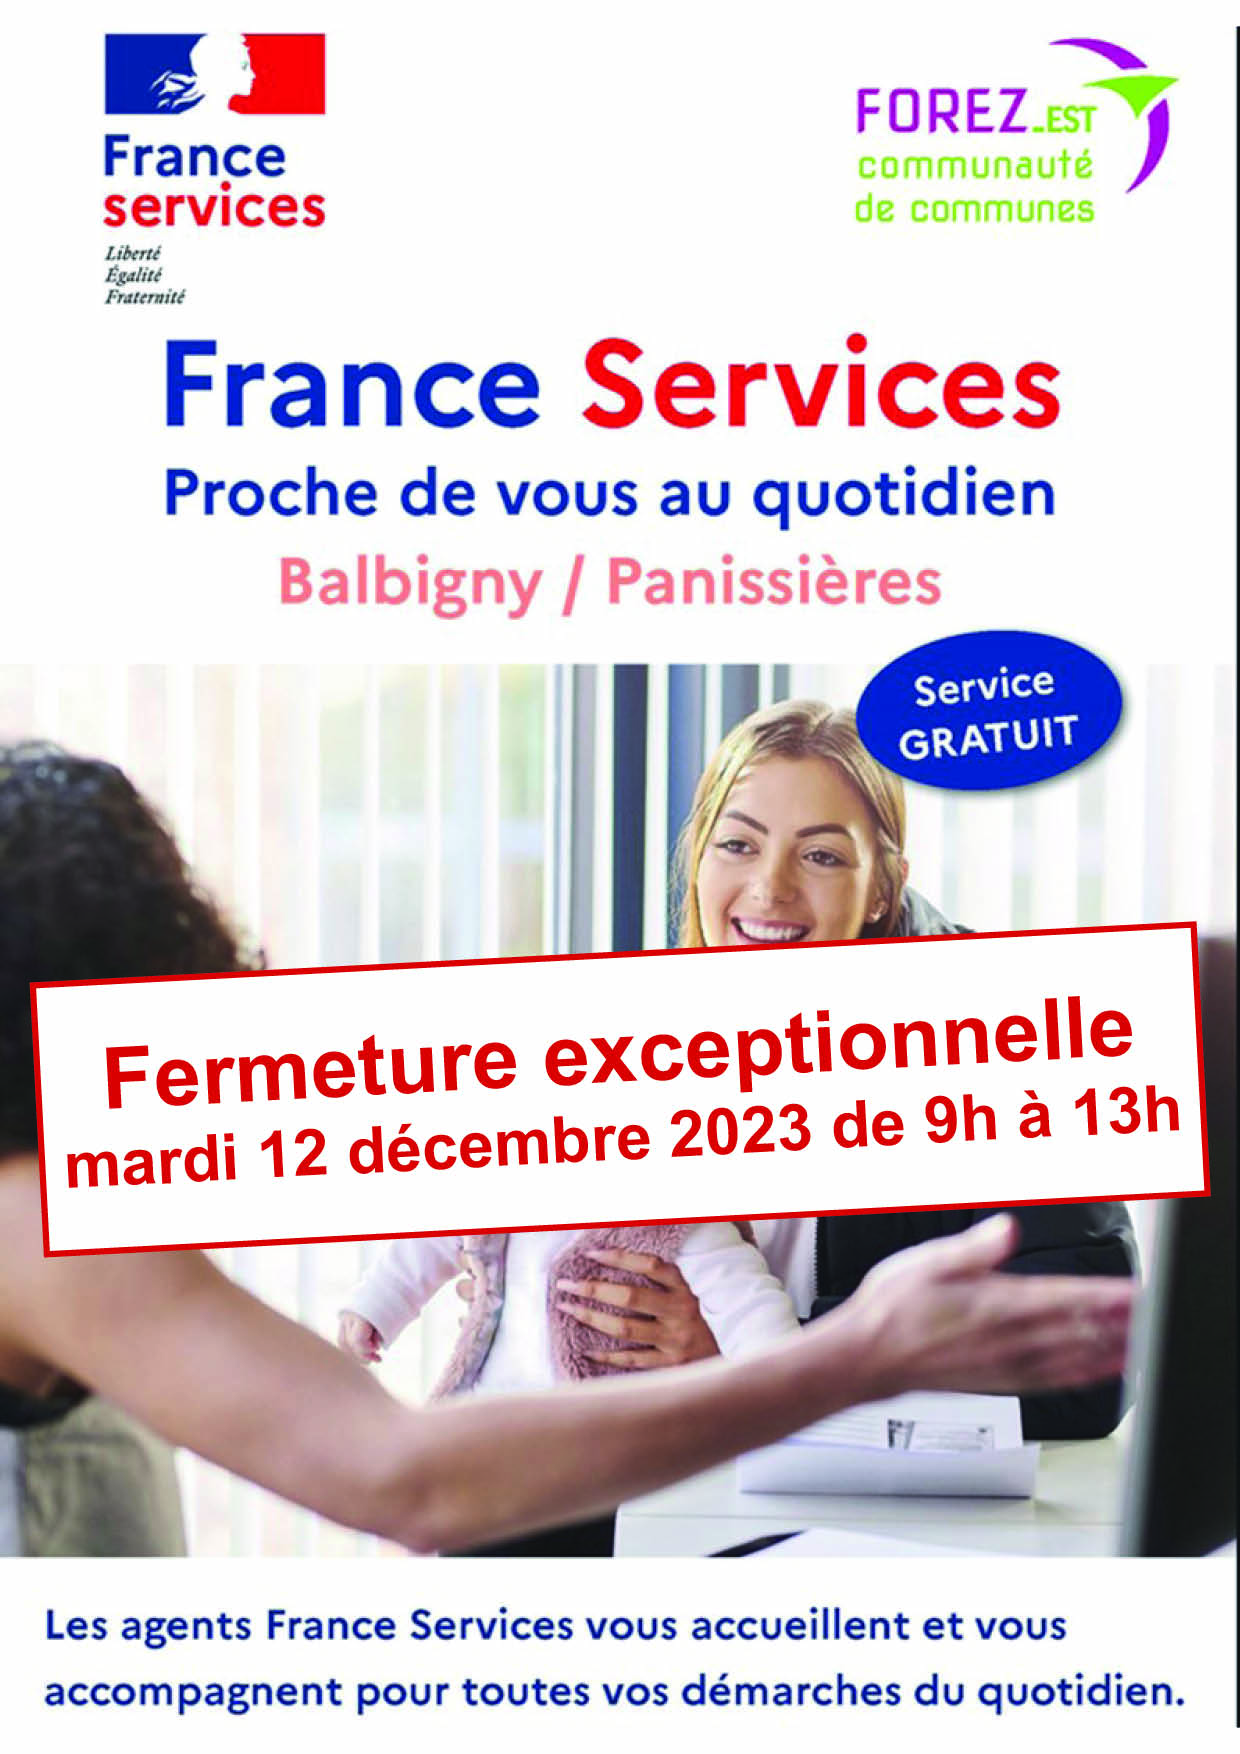 You are currently viewing Fermeture exceptionnelle France Services Panissières